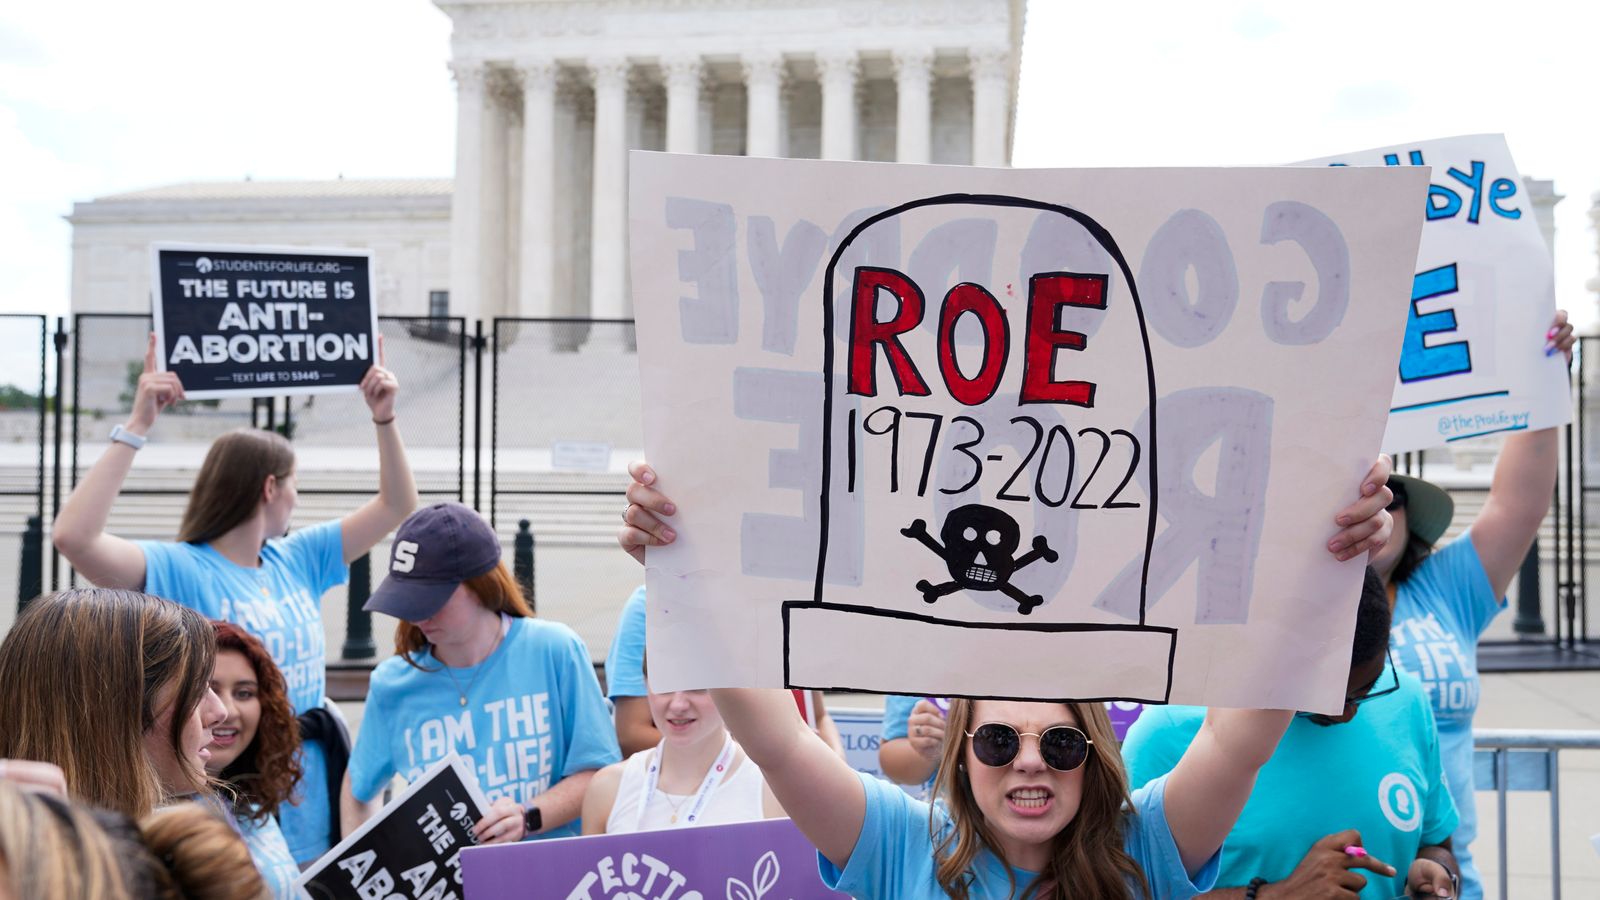 As Roe v Wade marks 50 years, what's changed since the landmark abortion decision was overturned?